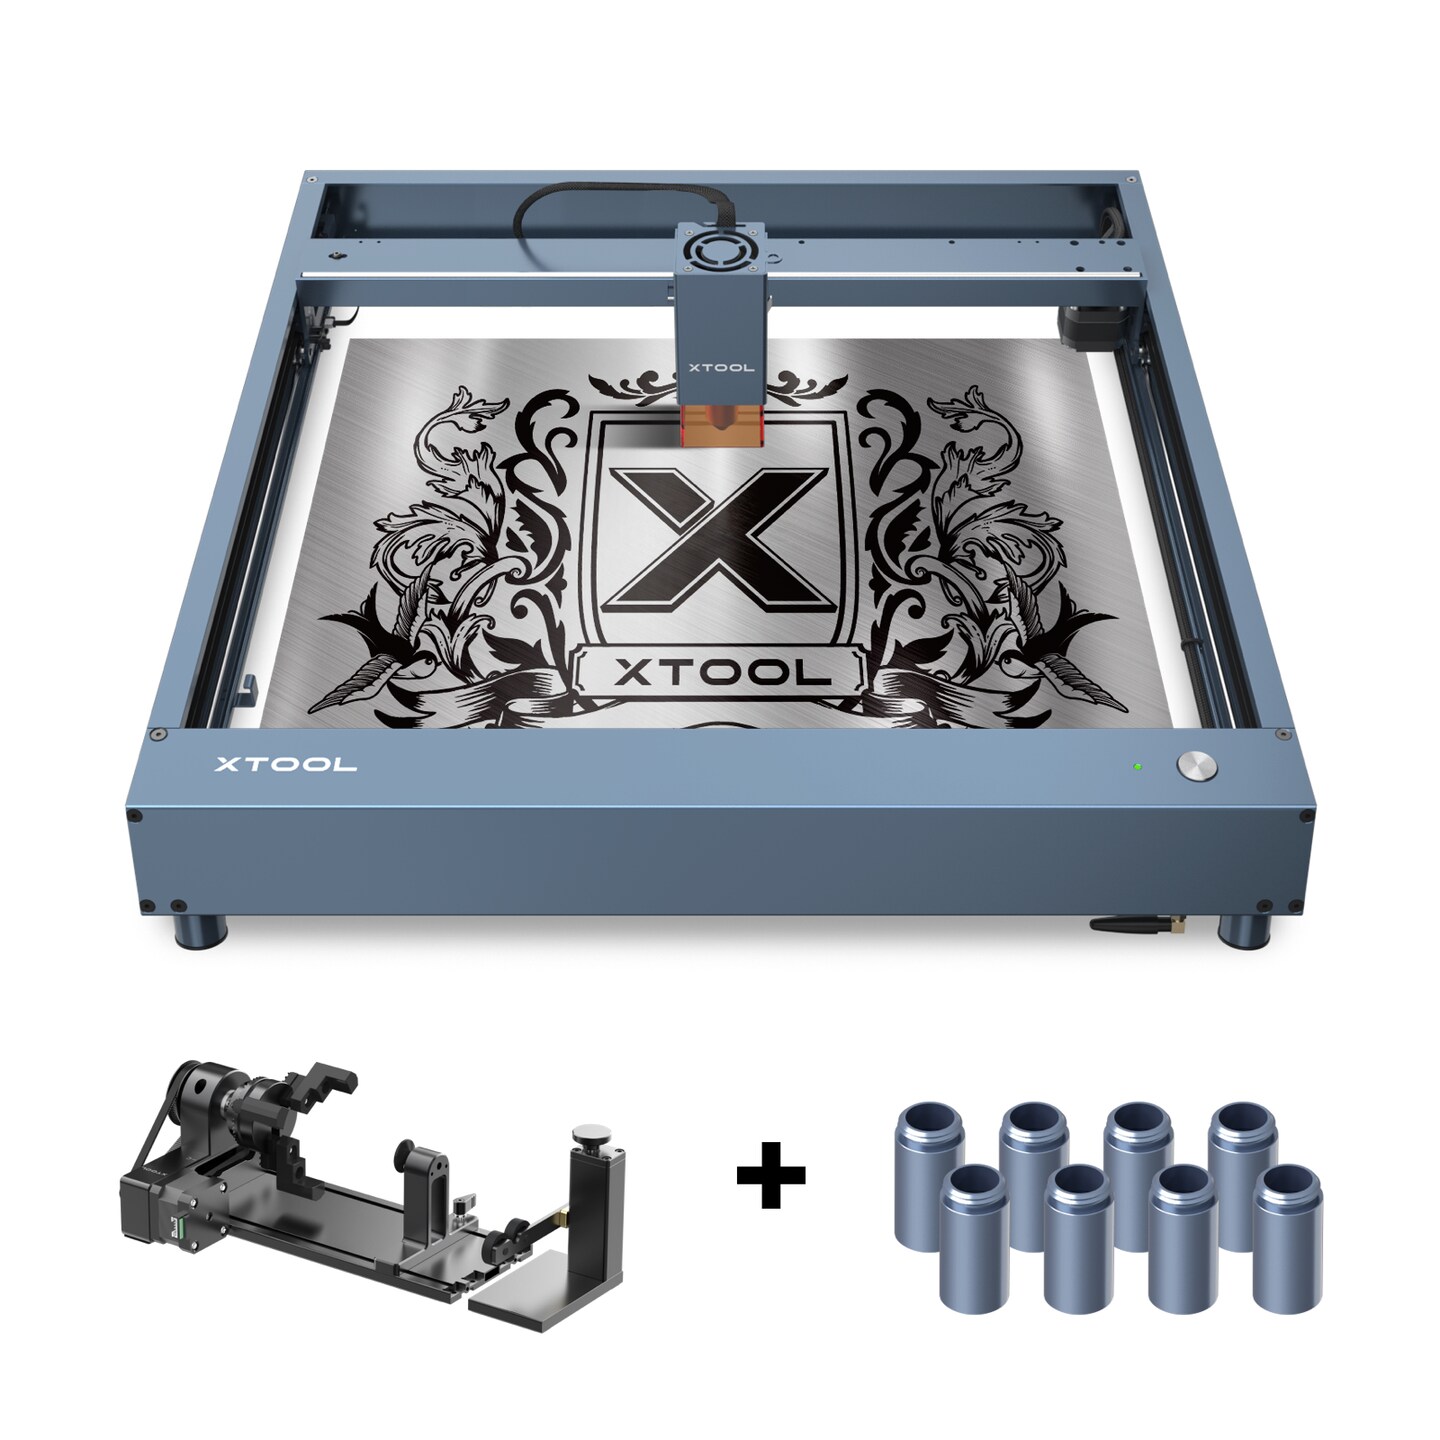 Getting Started With xTOOL D1 Pro - xTool